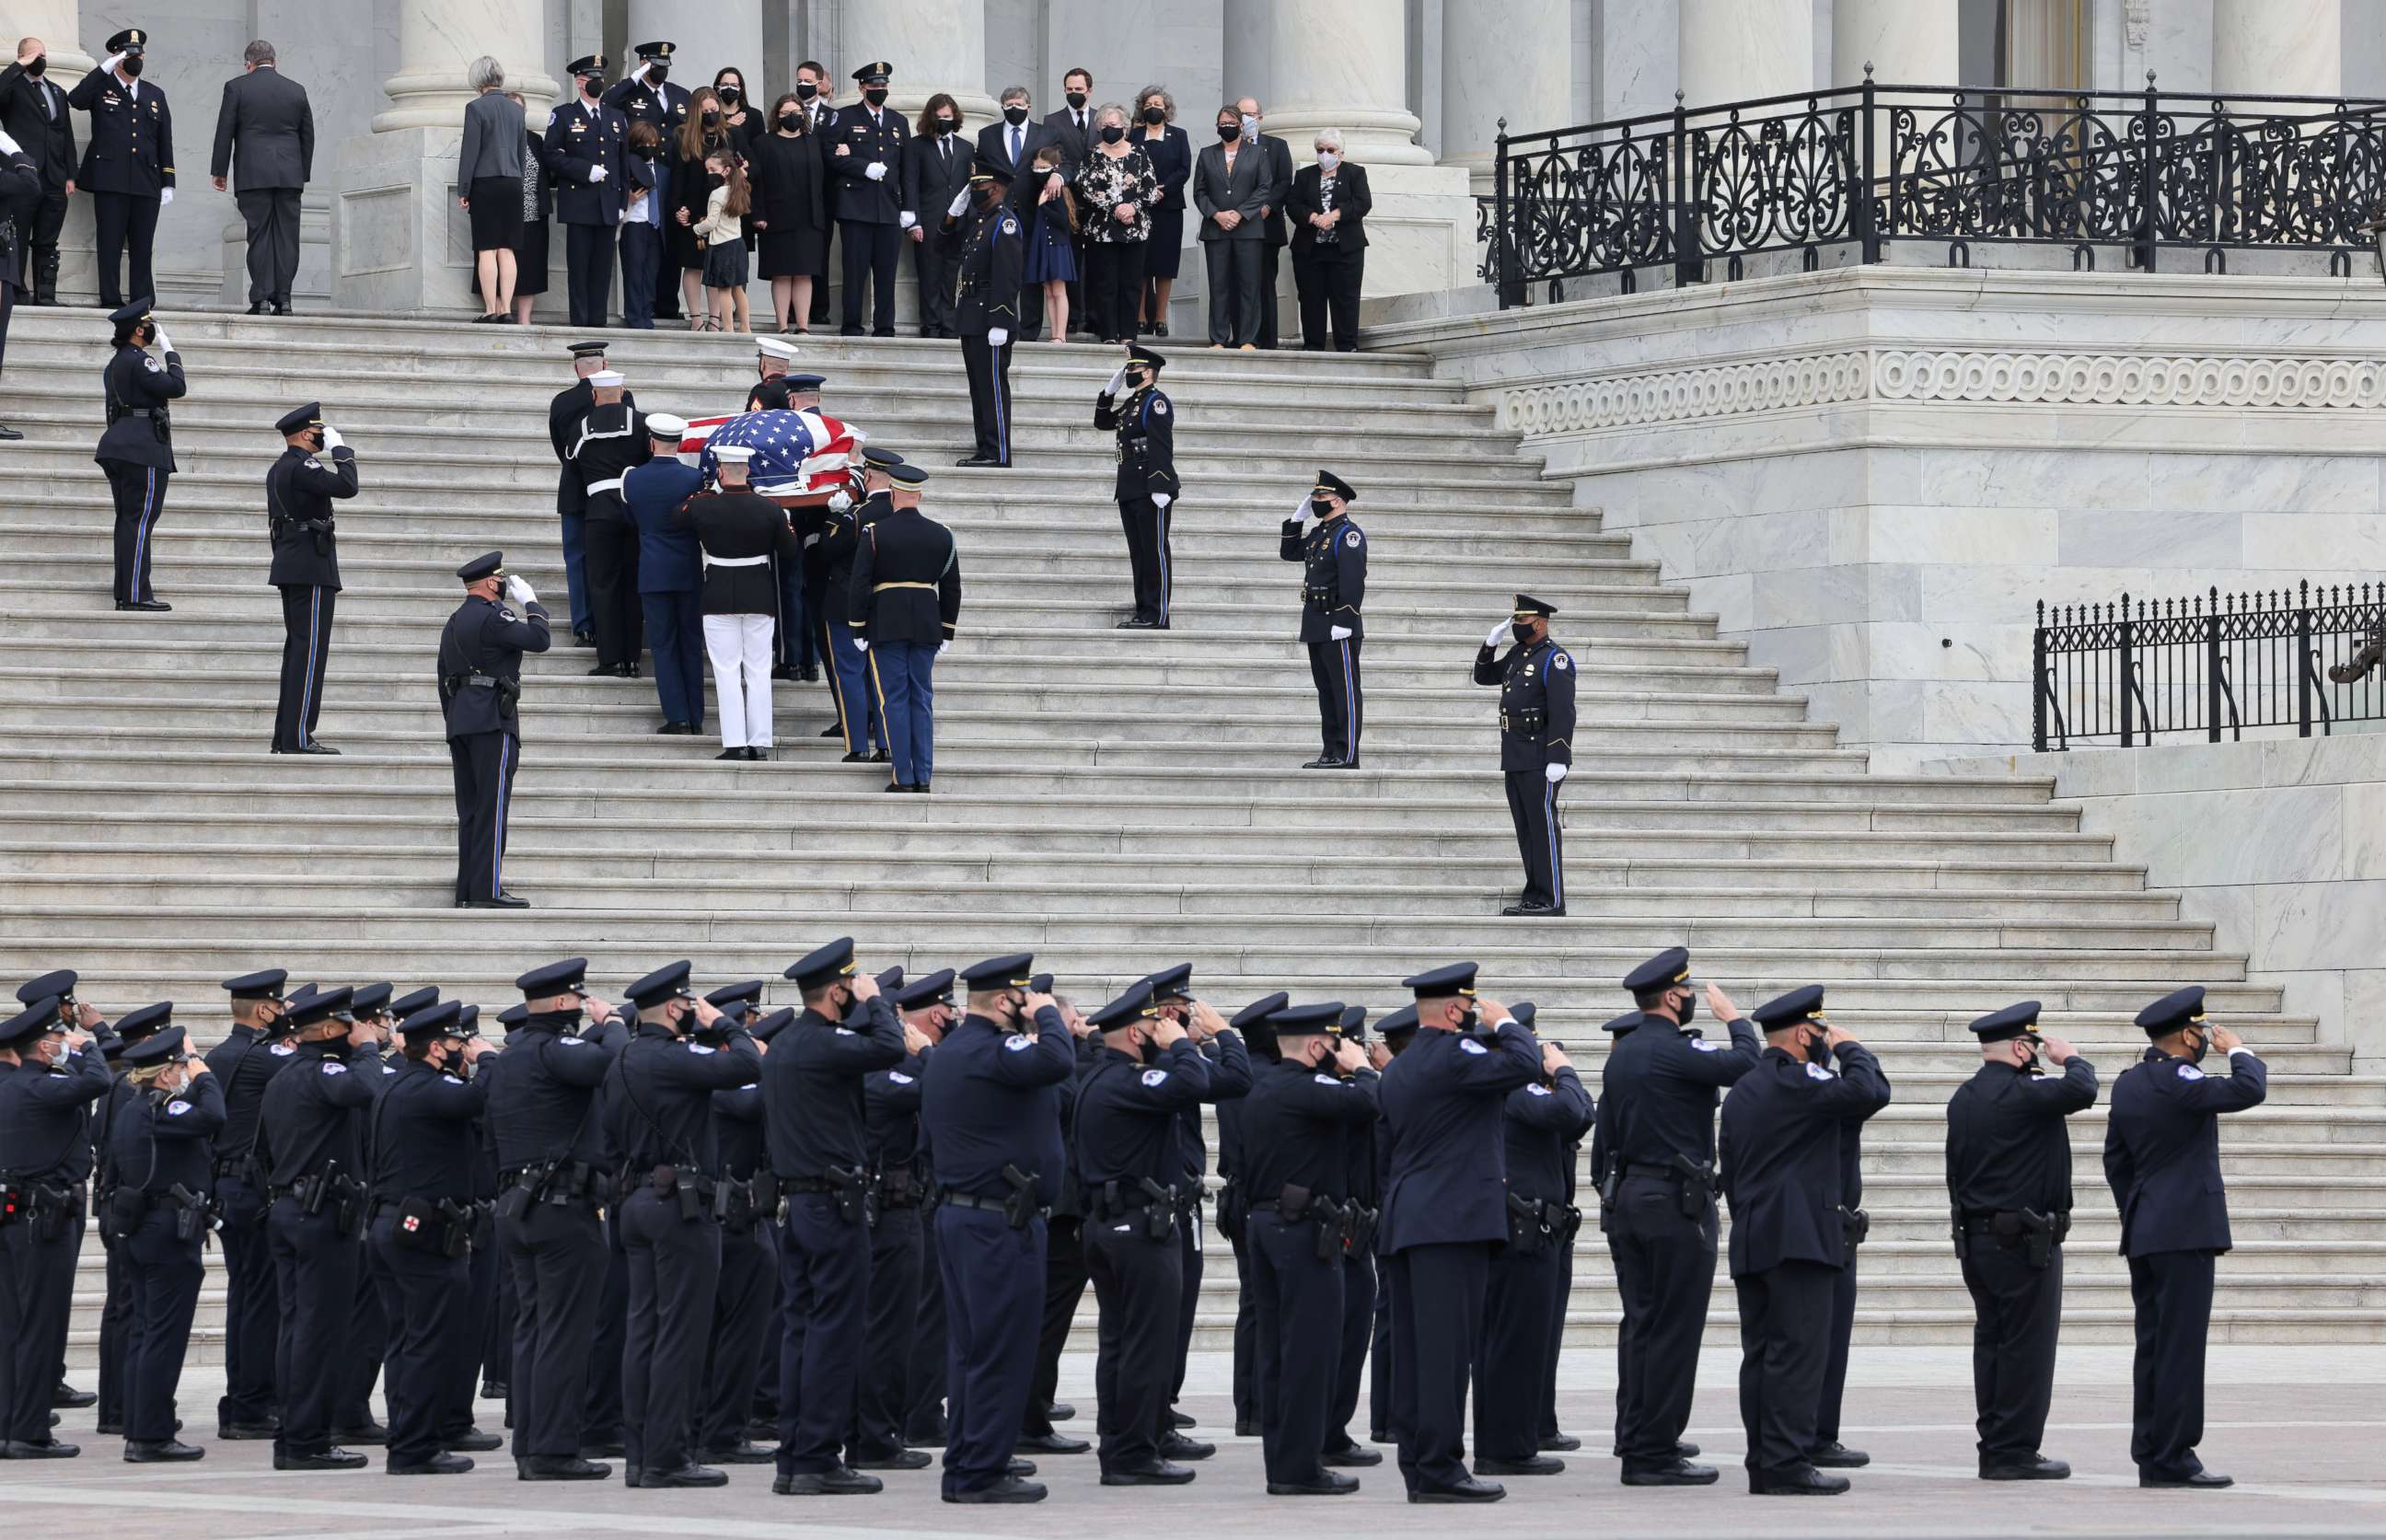 PHOTO: A casket containing the remains of Capitol Police officer William Evans, who was killed in the line of duty on April 2, arrives for a ceremony honoring the officer at the Capitol in Washington, April 13, 2021.